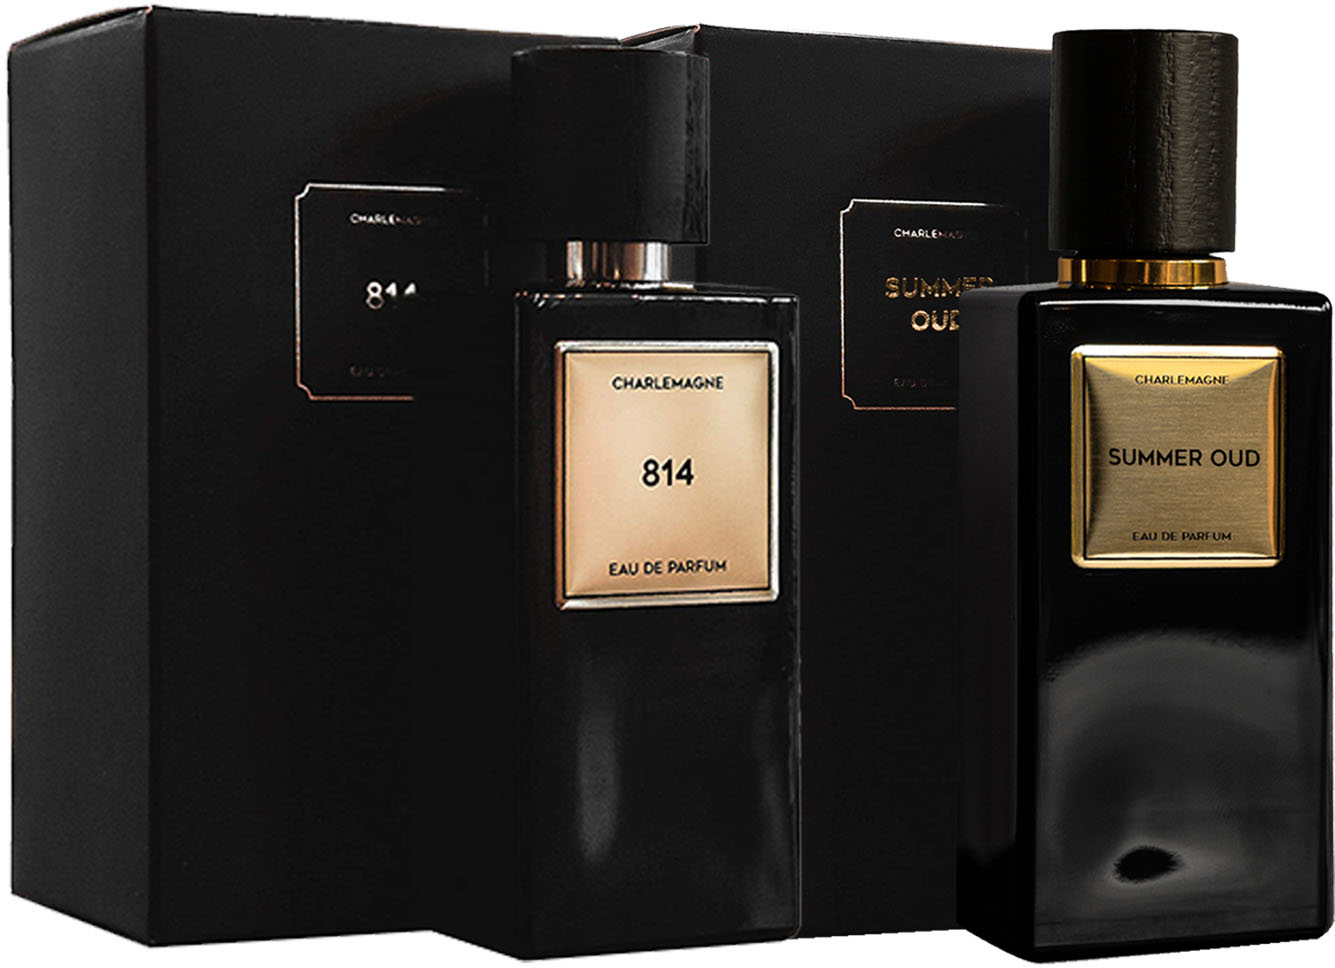 kaufen | Scents«, UNIVERSAL (4 Duft-Set »The CHARLEMAGNE tlg.)